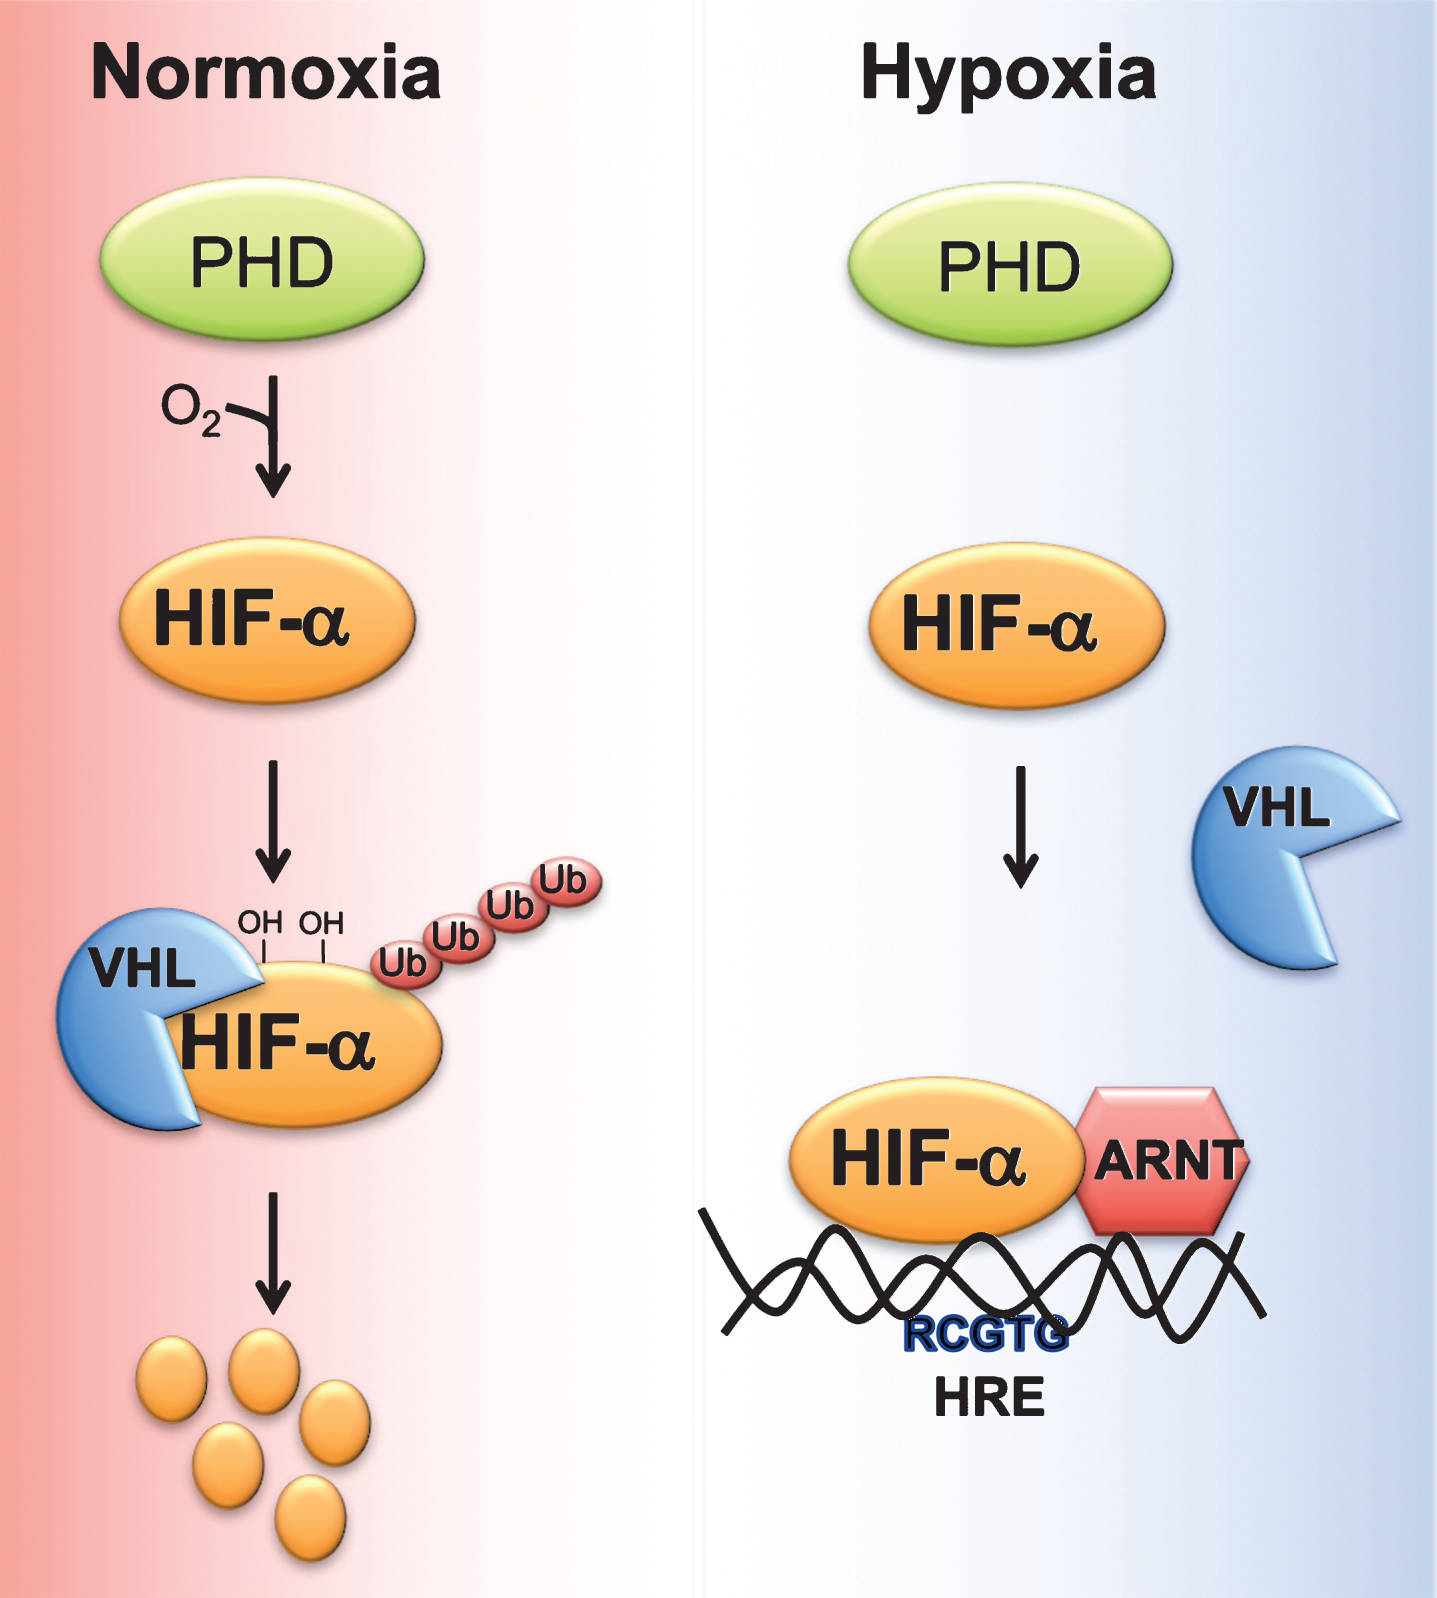 Regulation of HIF stability by oxygen. Under normoxic conditions, proline residues on HIFα subunit are hydroxylated by prolyl 4-hydroxylase domain-containing proteins (PHD). Hydroxylated HIF alpha bind the E3 ubiquitin ligase von Hippel Lindau tumor suppressor protein (VHL), which induces ubiquitin-mediated degradation of HIFα. Hypoxic conditions, decrease the ability of PHDs to hydroxylate HIFα subunit, resulting in stabilization and heterodimerization of HIFα with aryl hydrocarbon receptor nuclear translocator (ARNT). HIFα/ARNT complex binds to response elements (RCGTG) on HIF target genes and induces their expression.